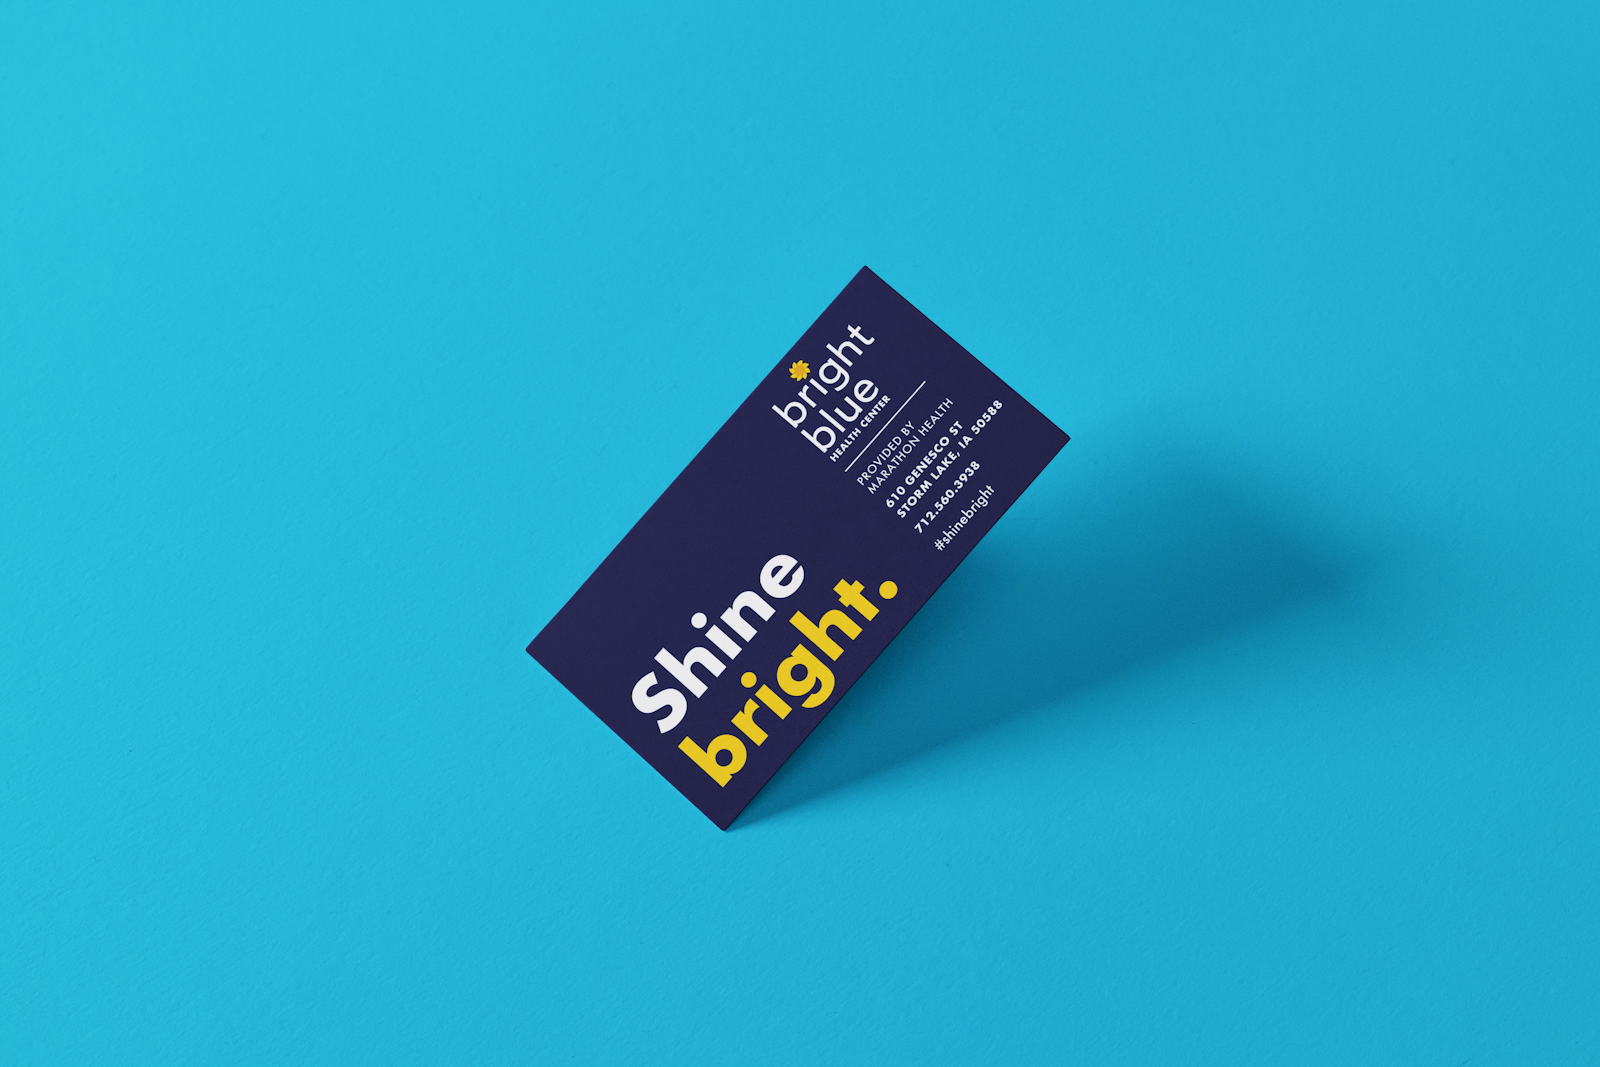 The Bright Blue brand design magnet with Shine Bright and on a blue background.